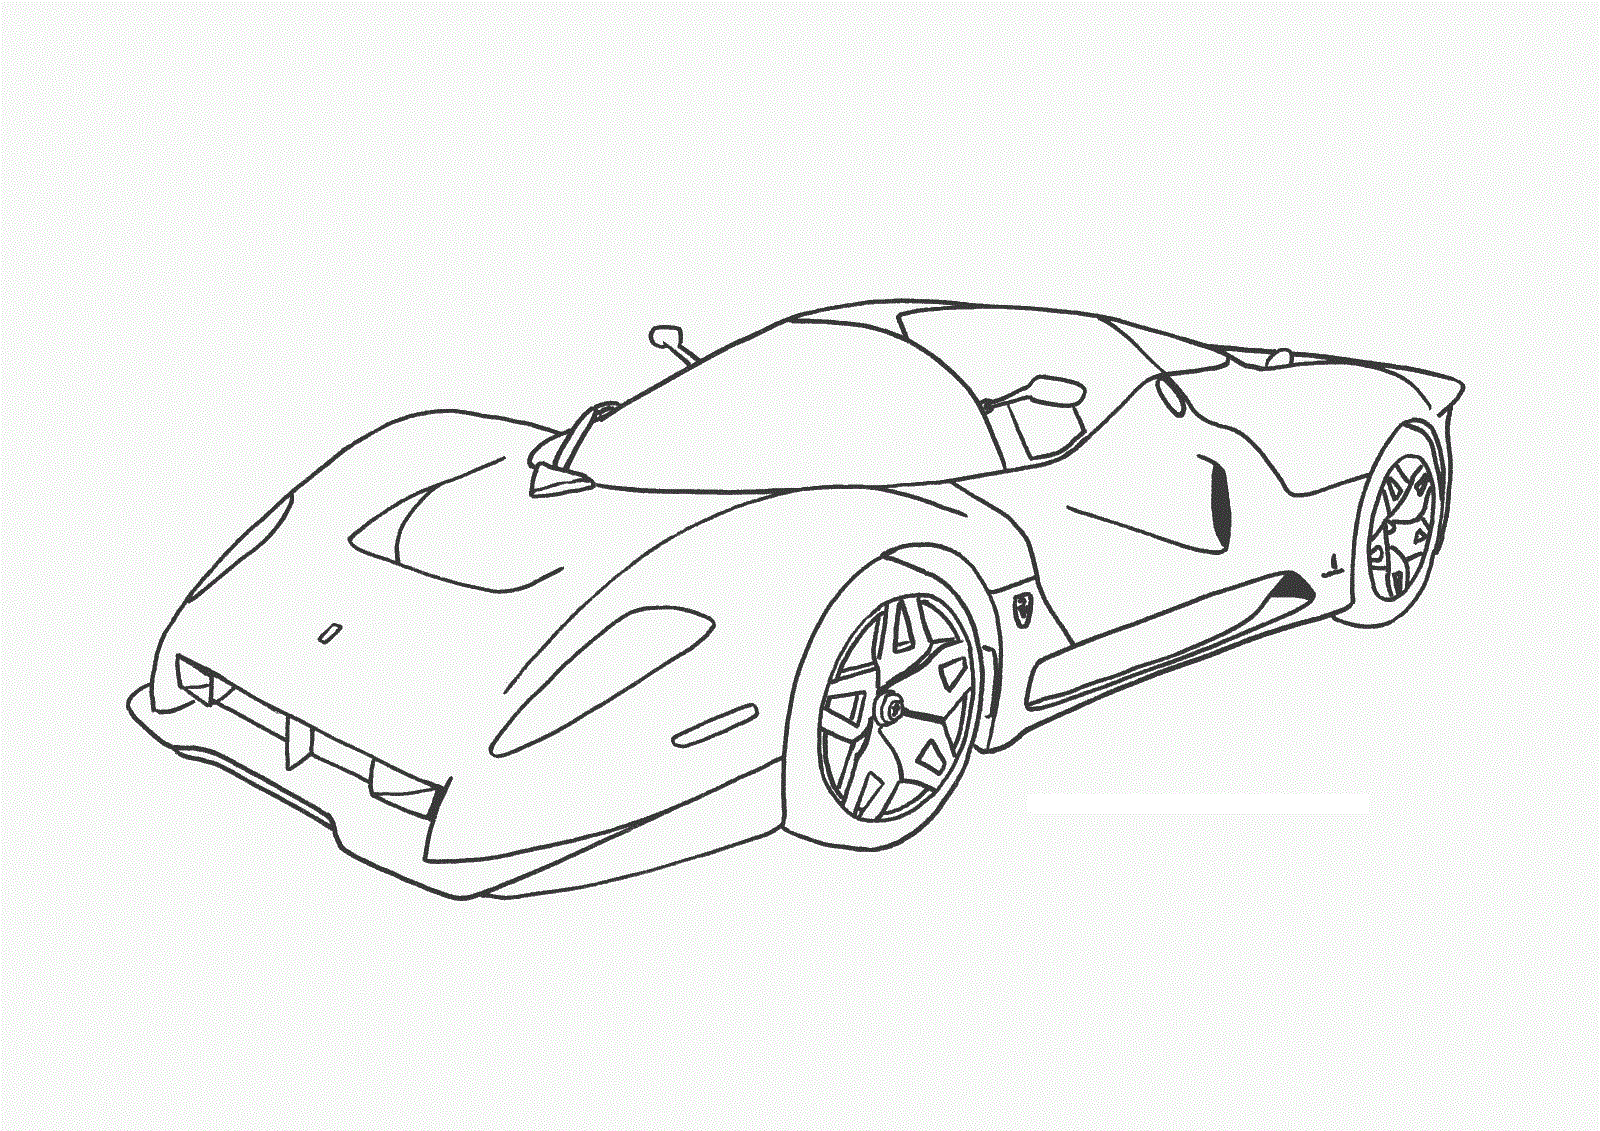 Free Printable Race Car Coloring Pages For Kids | Cars coloring pages,  Sports coloring pages, Race car coloring pages